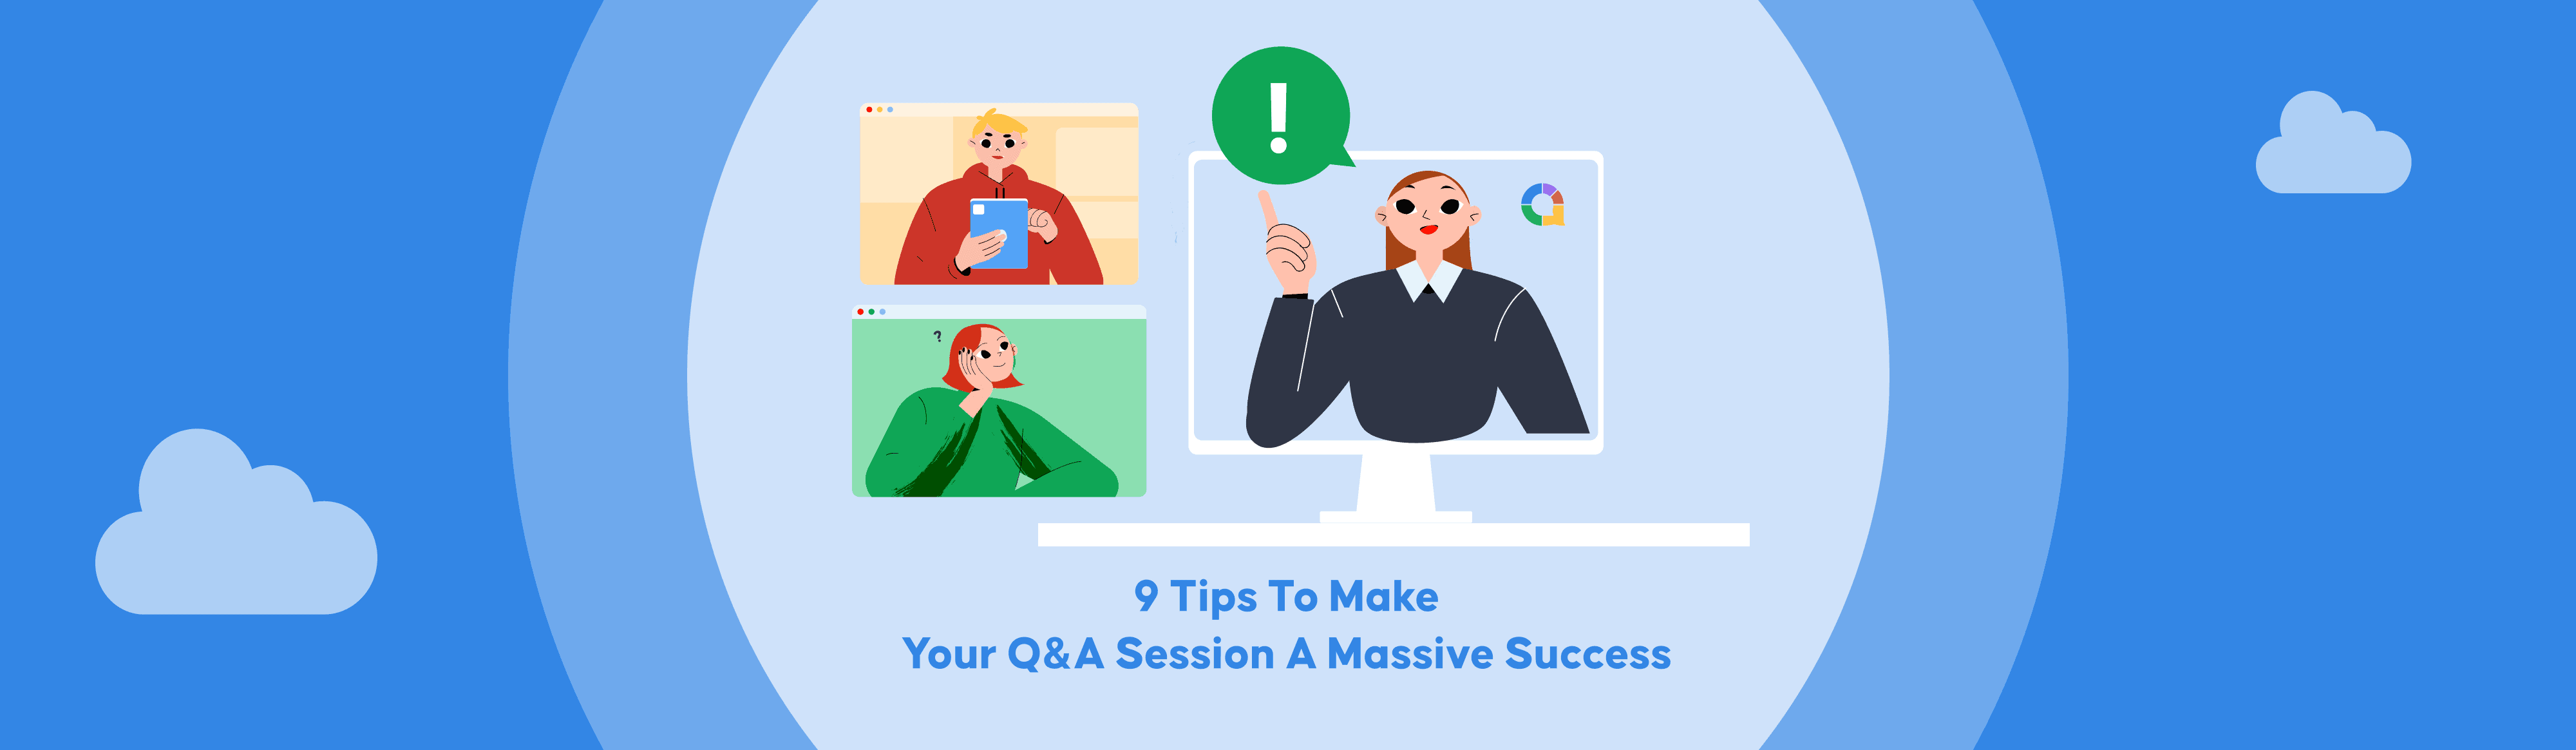 Live Q&A Session | 10 Tips To Make A Massive Success in 2023